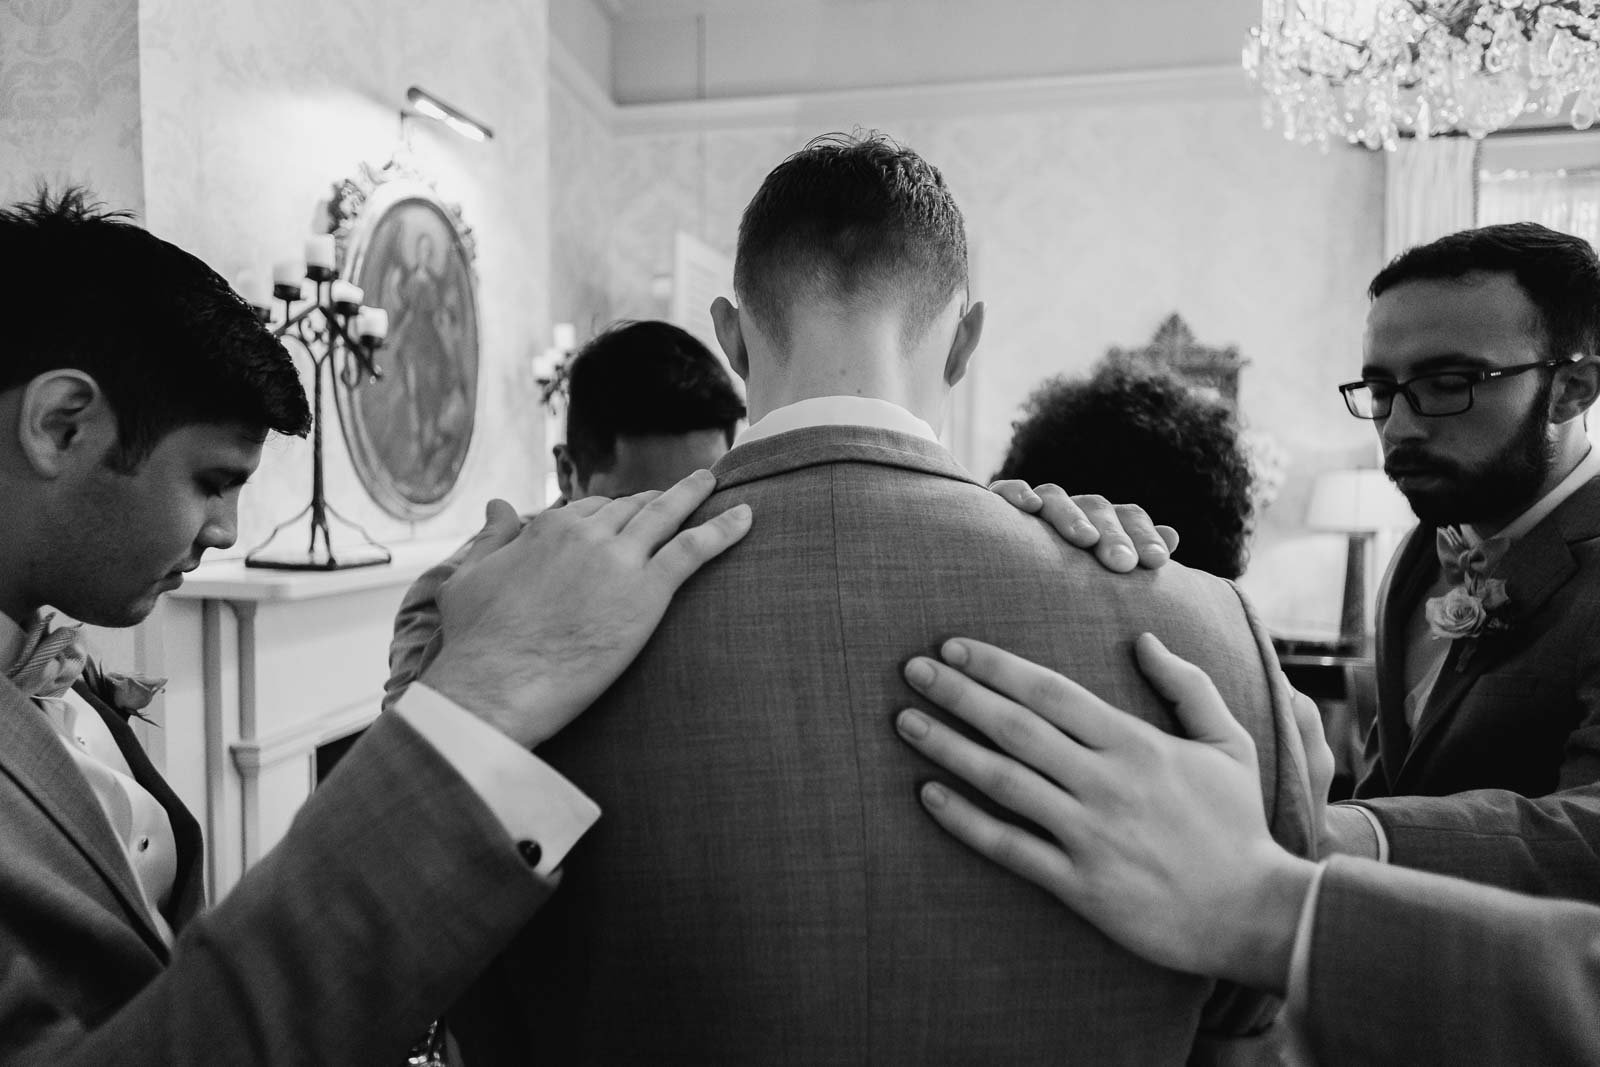 Behind the groomsman as hands are rested on his back